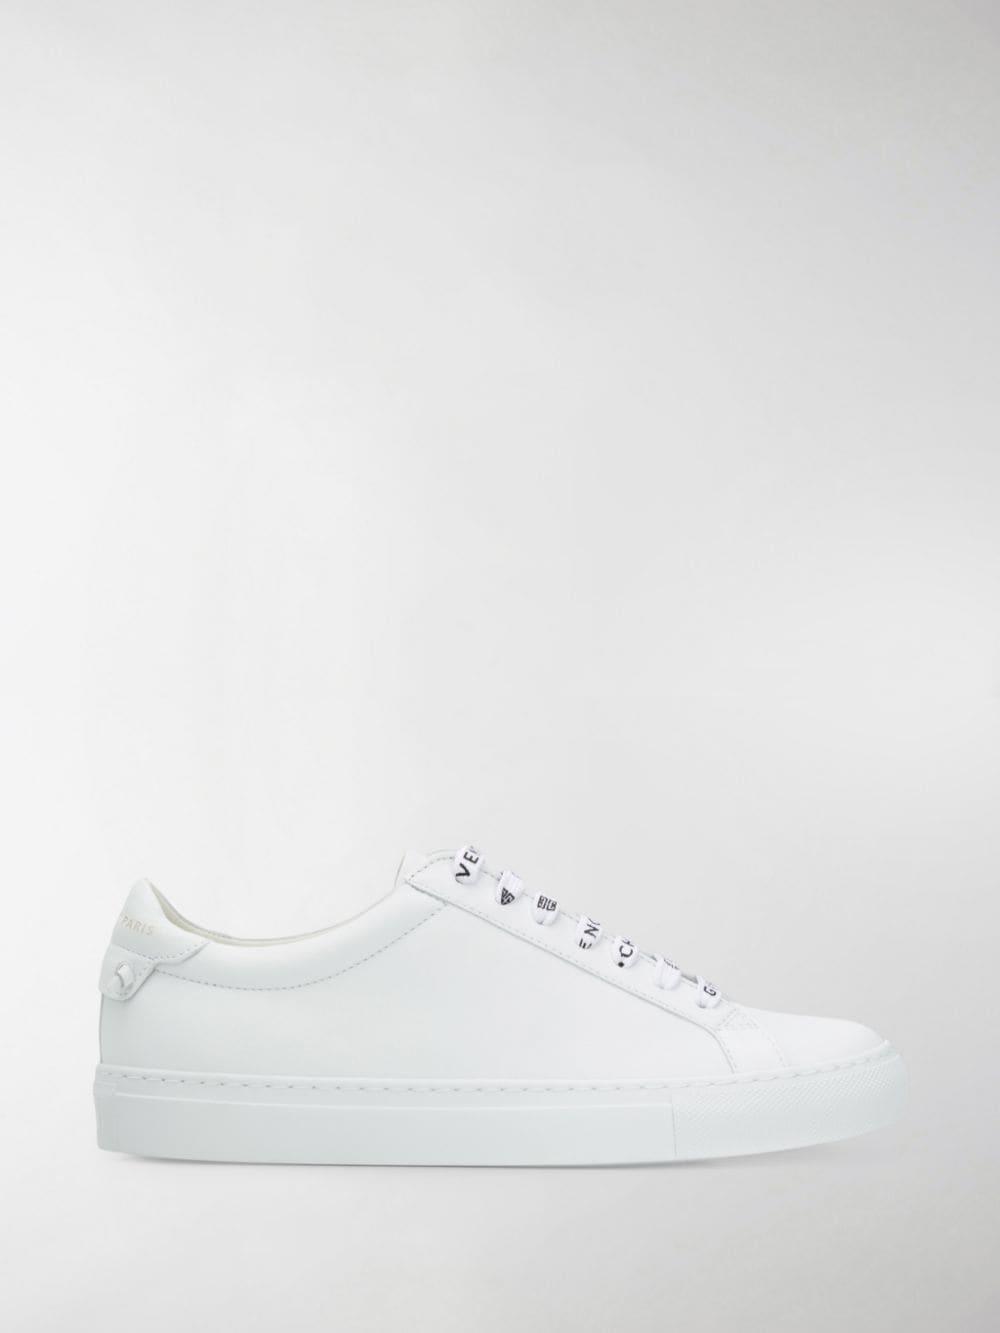 Givenchy Cashmere Urban Street Sneakers in White - Save 57% - Lyst